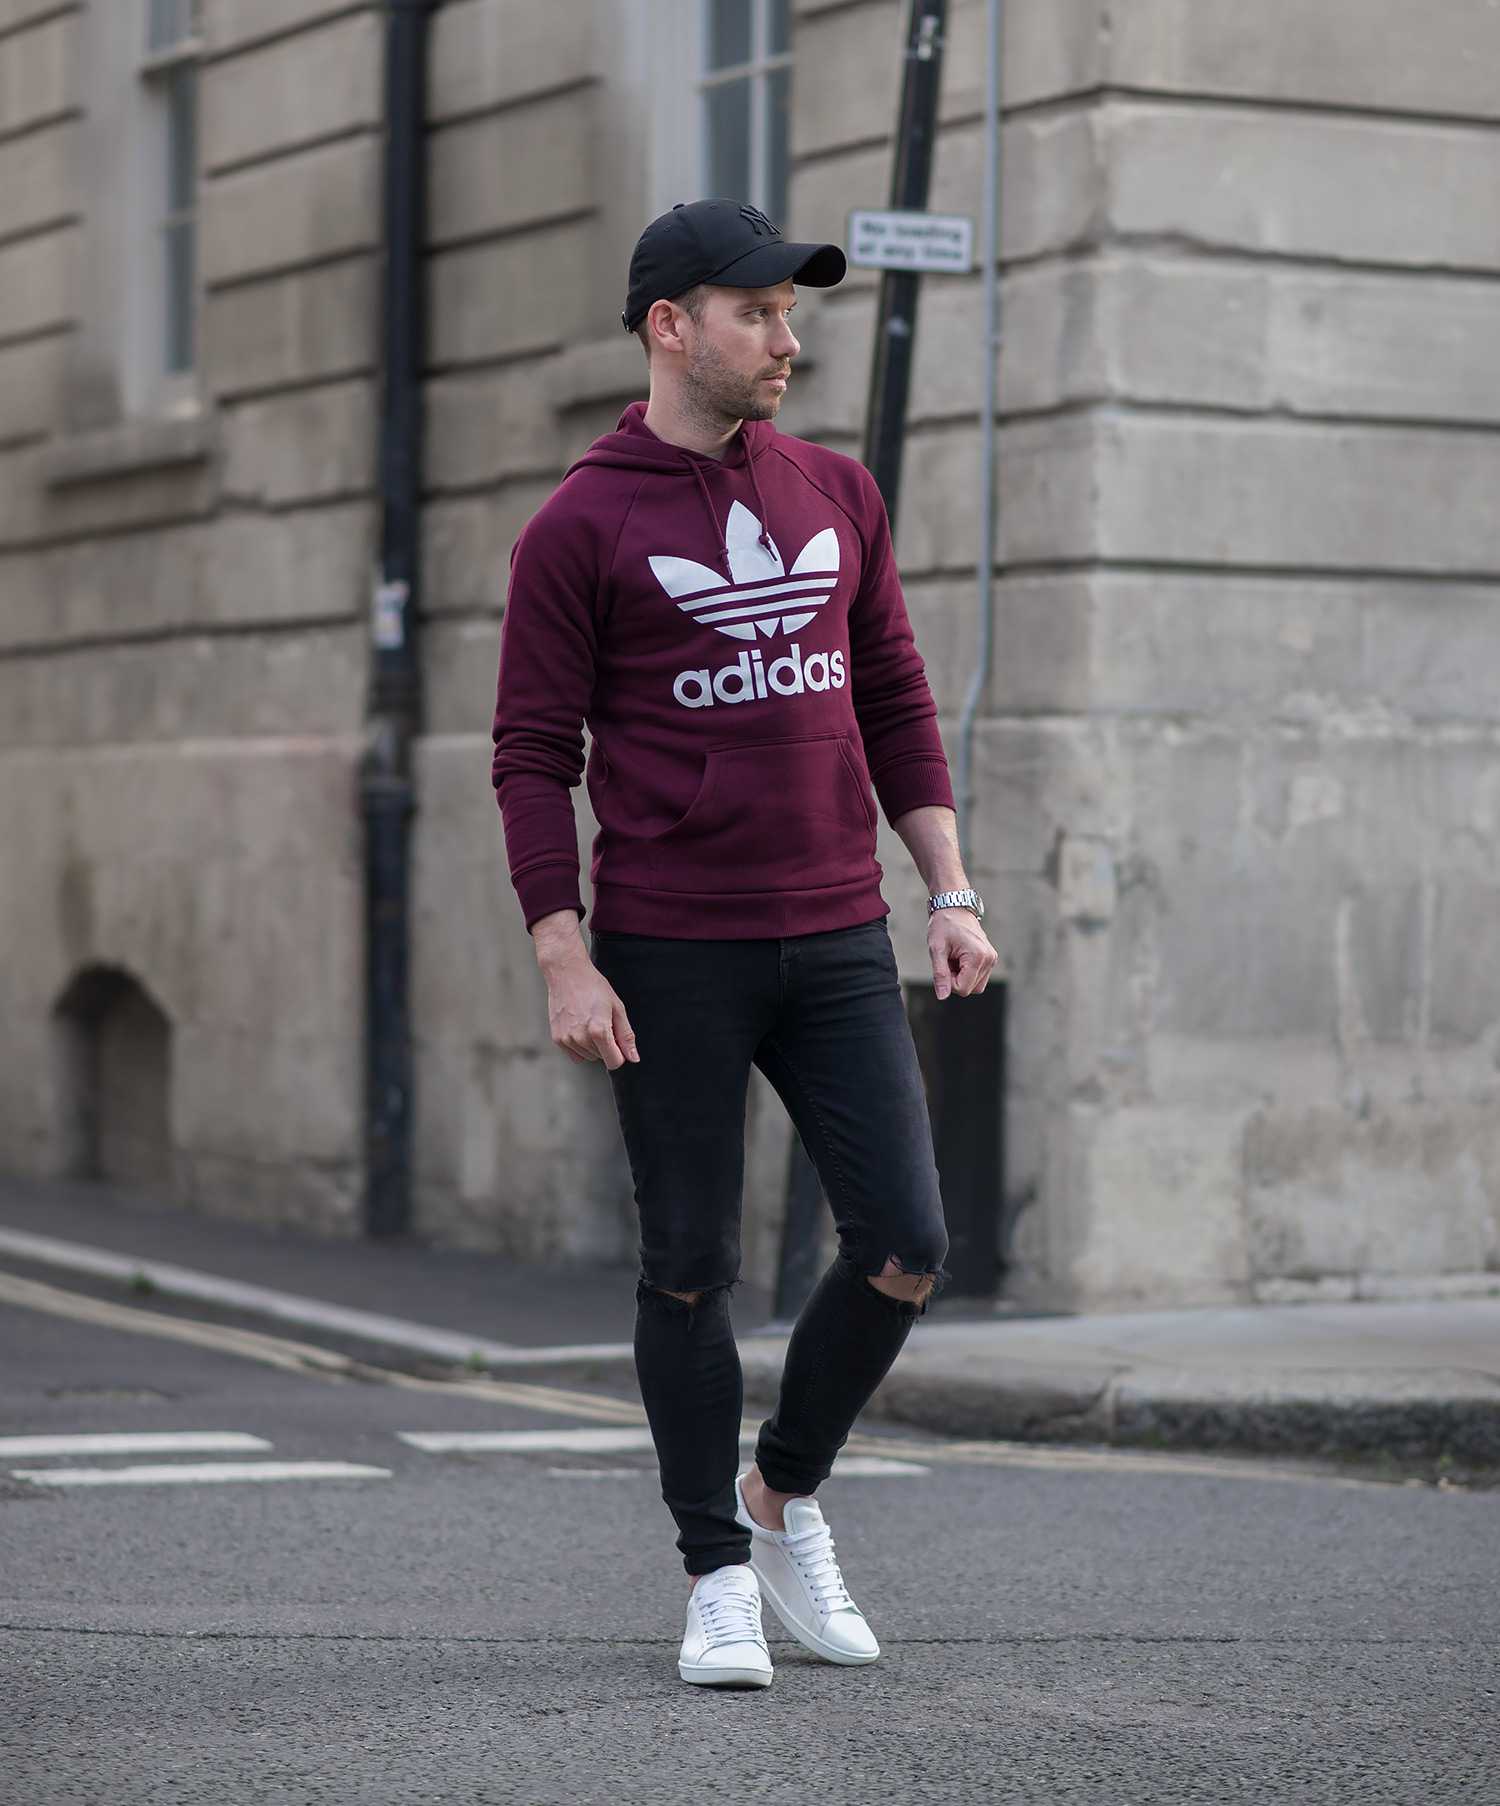 adidas men's outfit